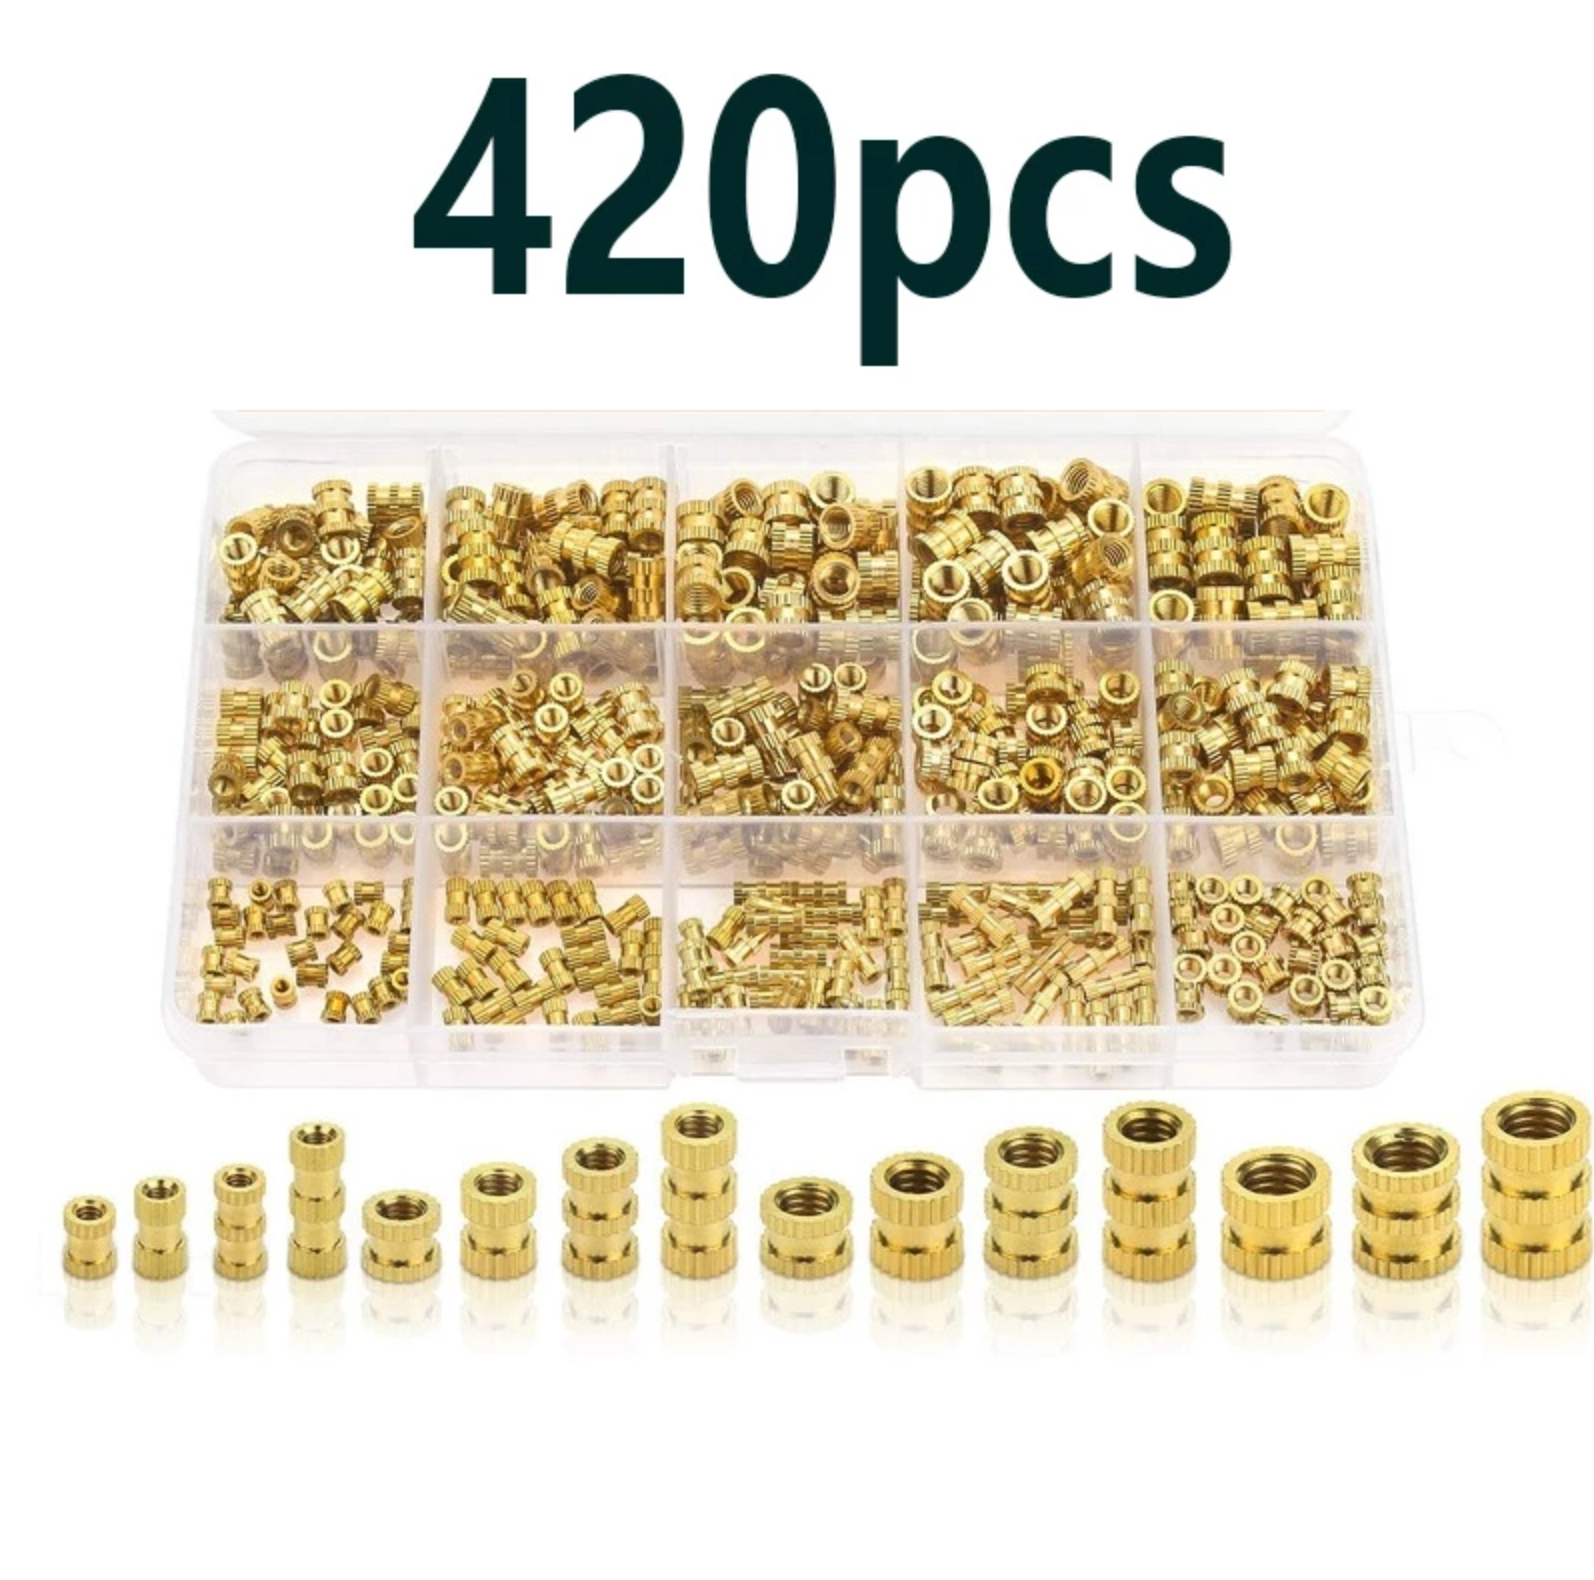 420pc Set of Knurled Threaded Inserts (M2, M3, M4 and M5)